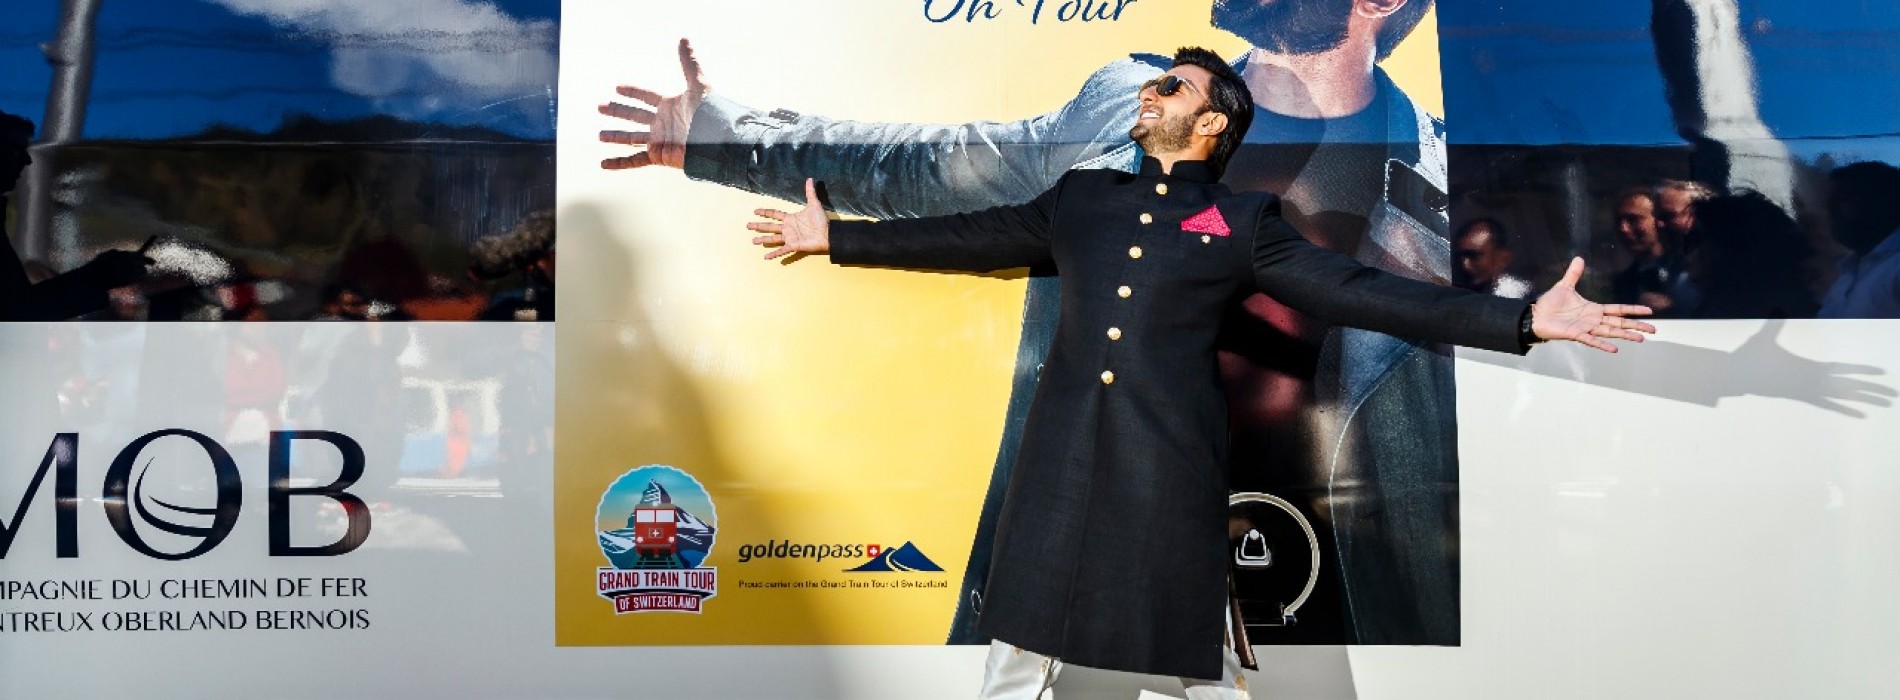 The ‘Ranveer on Tour’ Golden Pass Line Train takes off in Switzerland